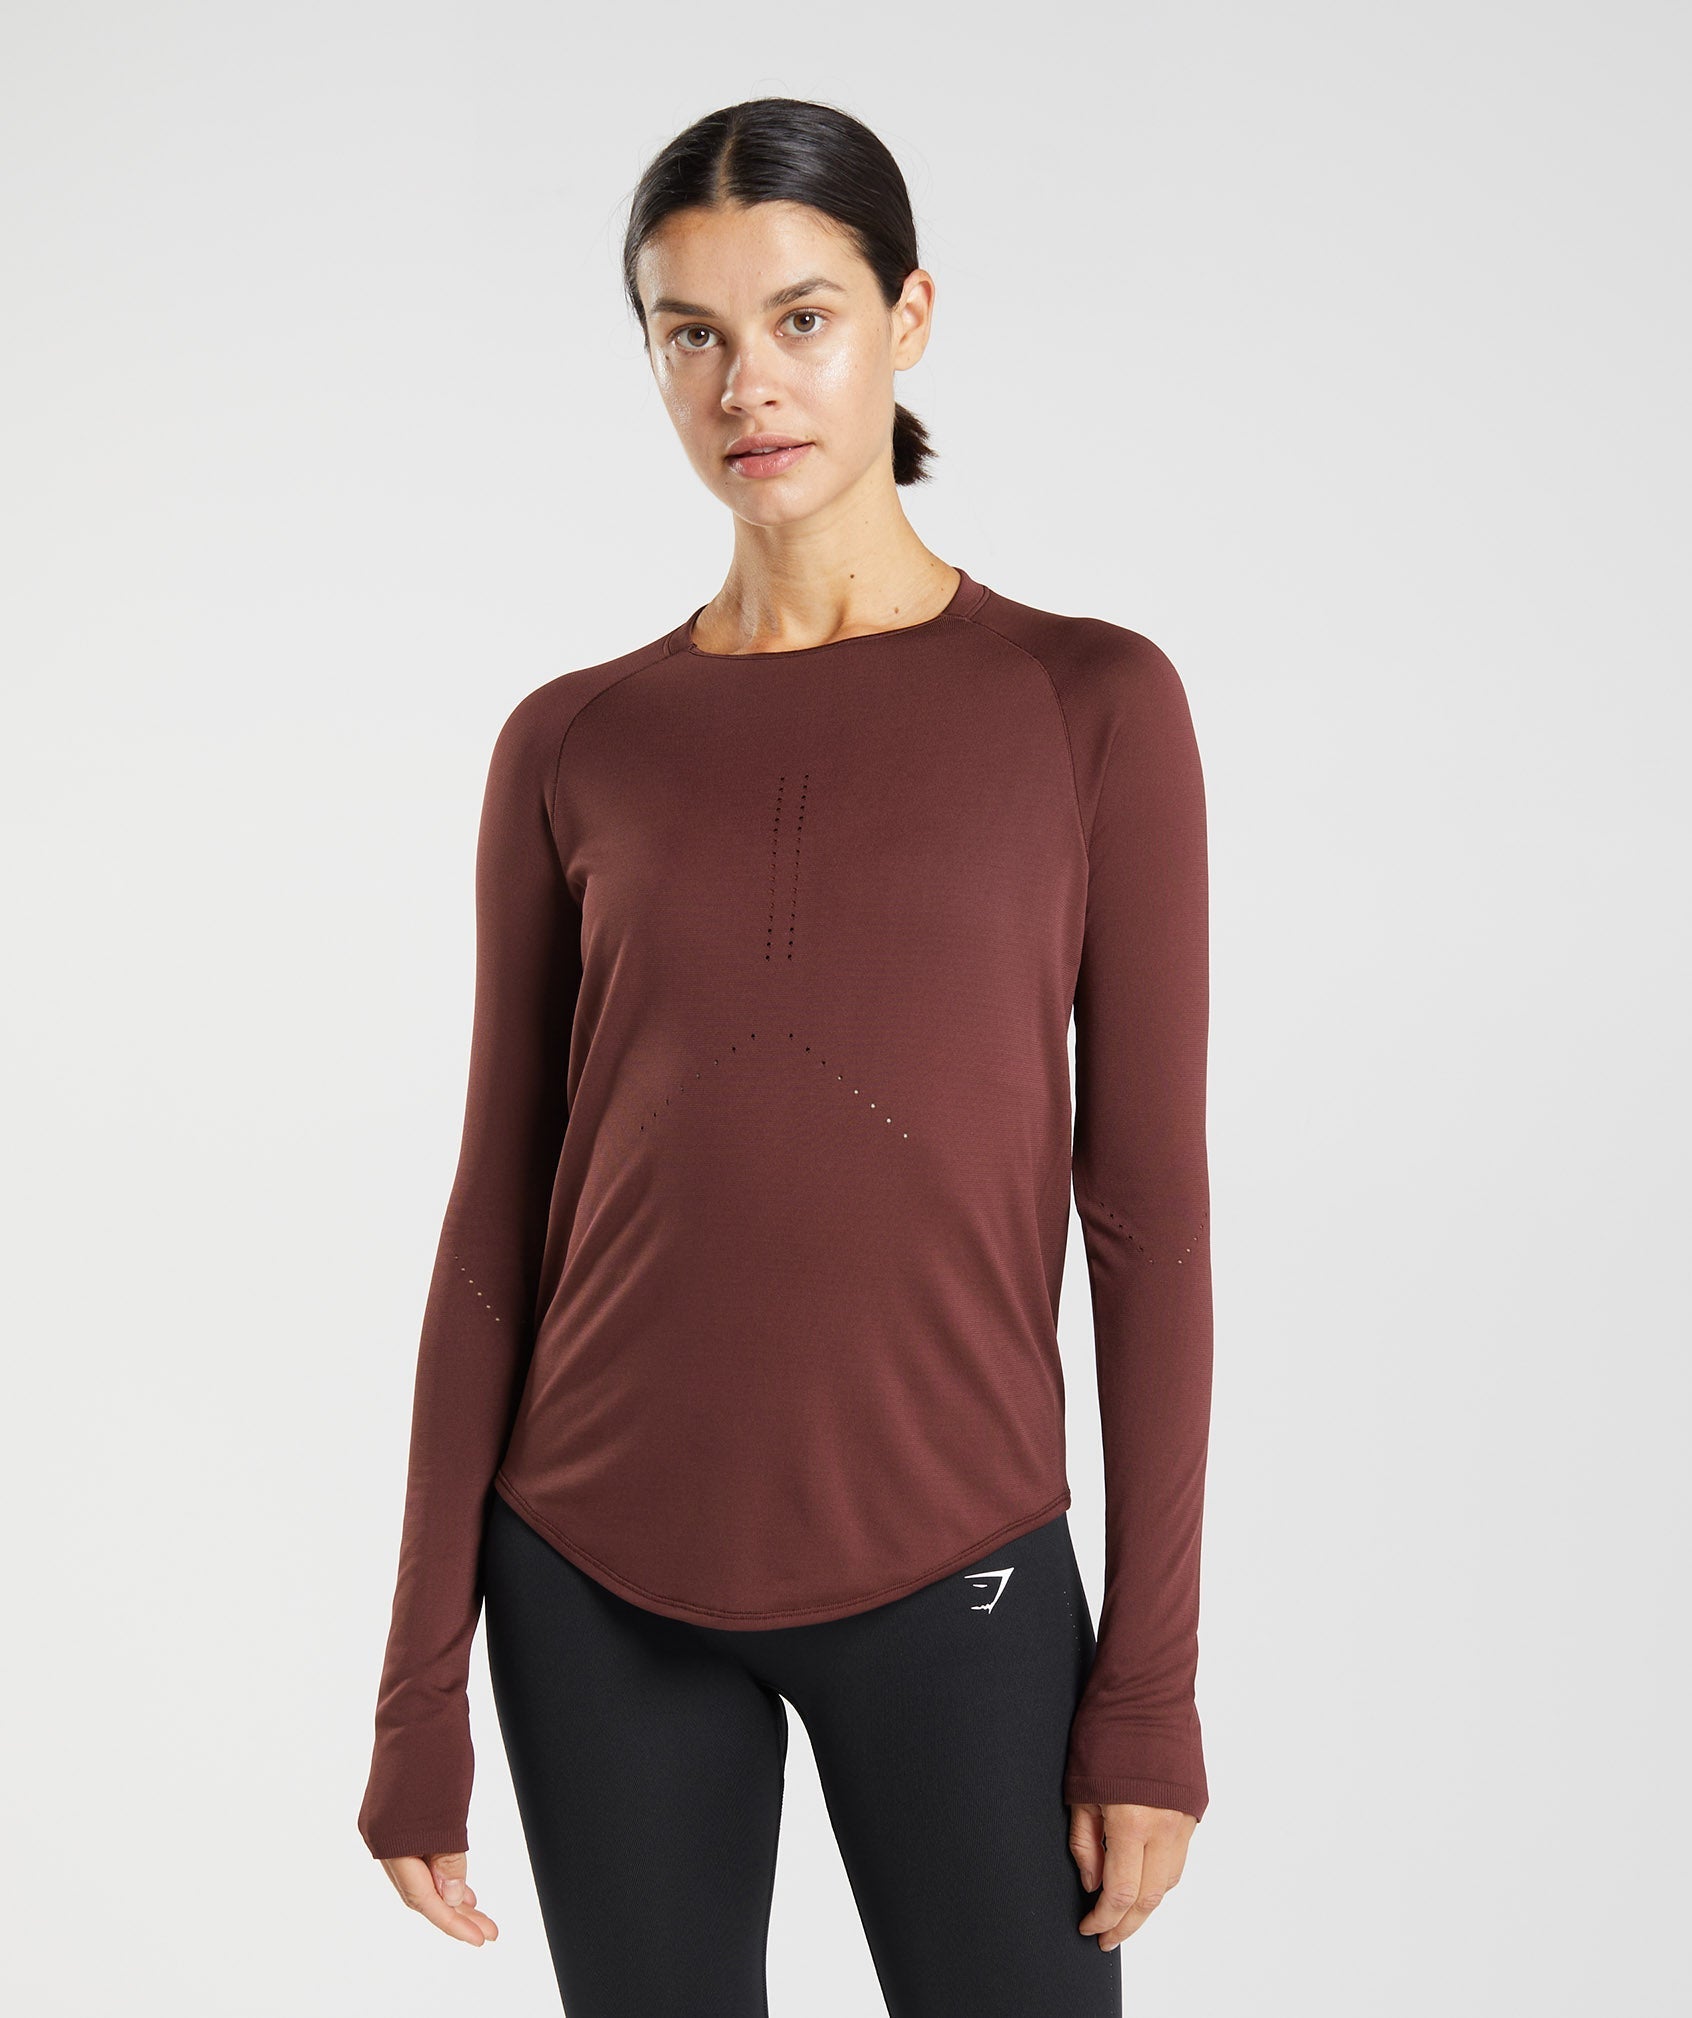 Sweat Seamless Long Sleeve Top in Baked Maroon - view 1